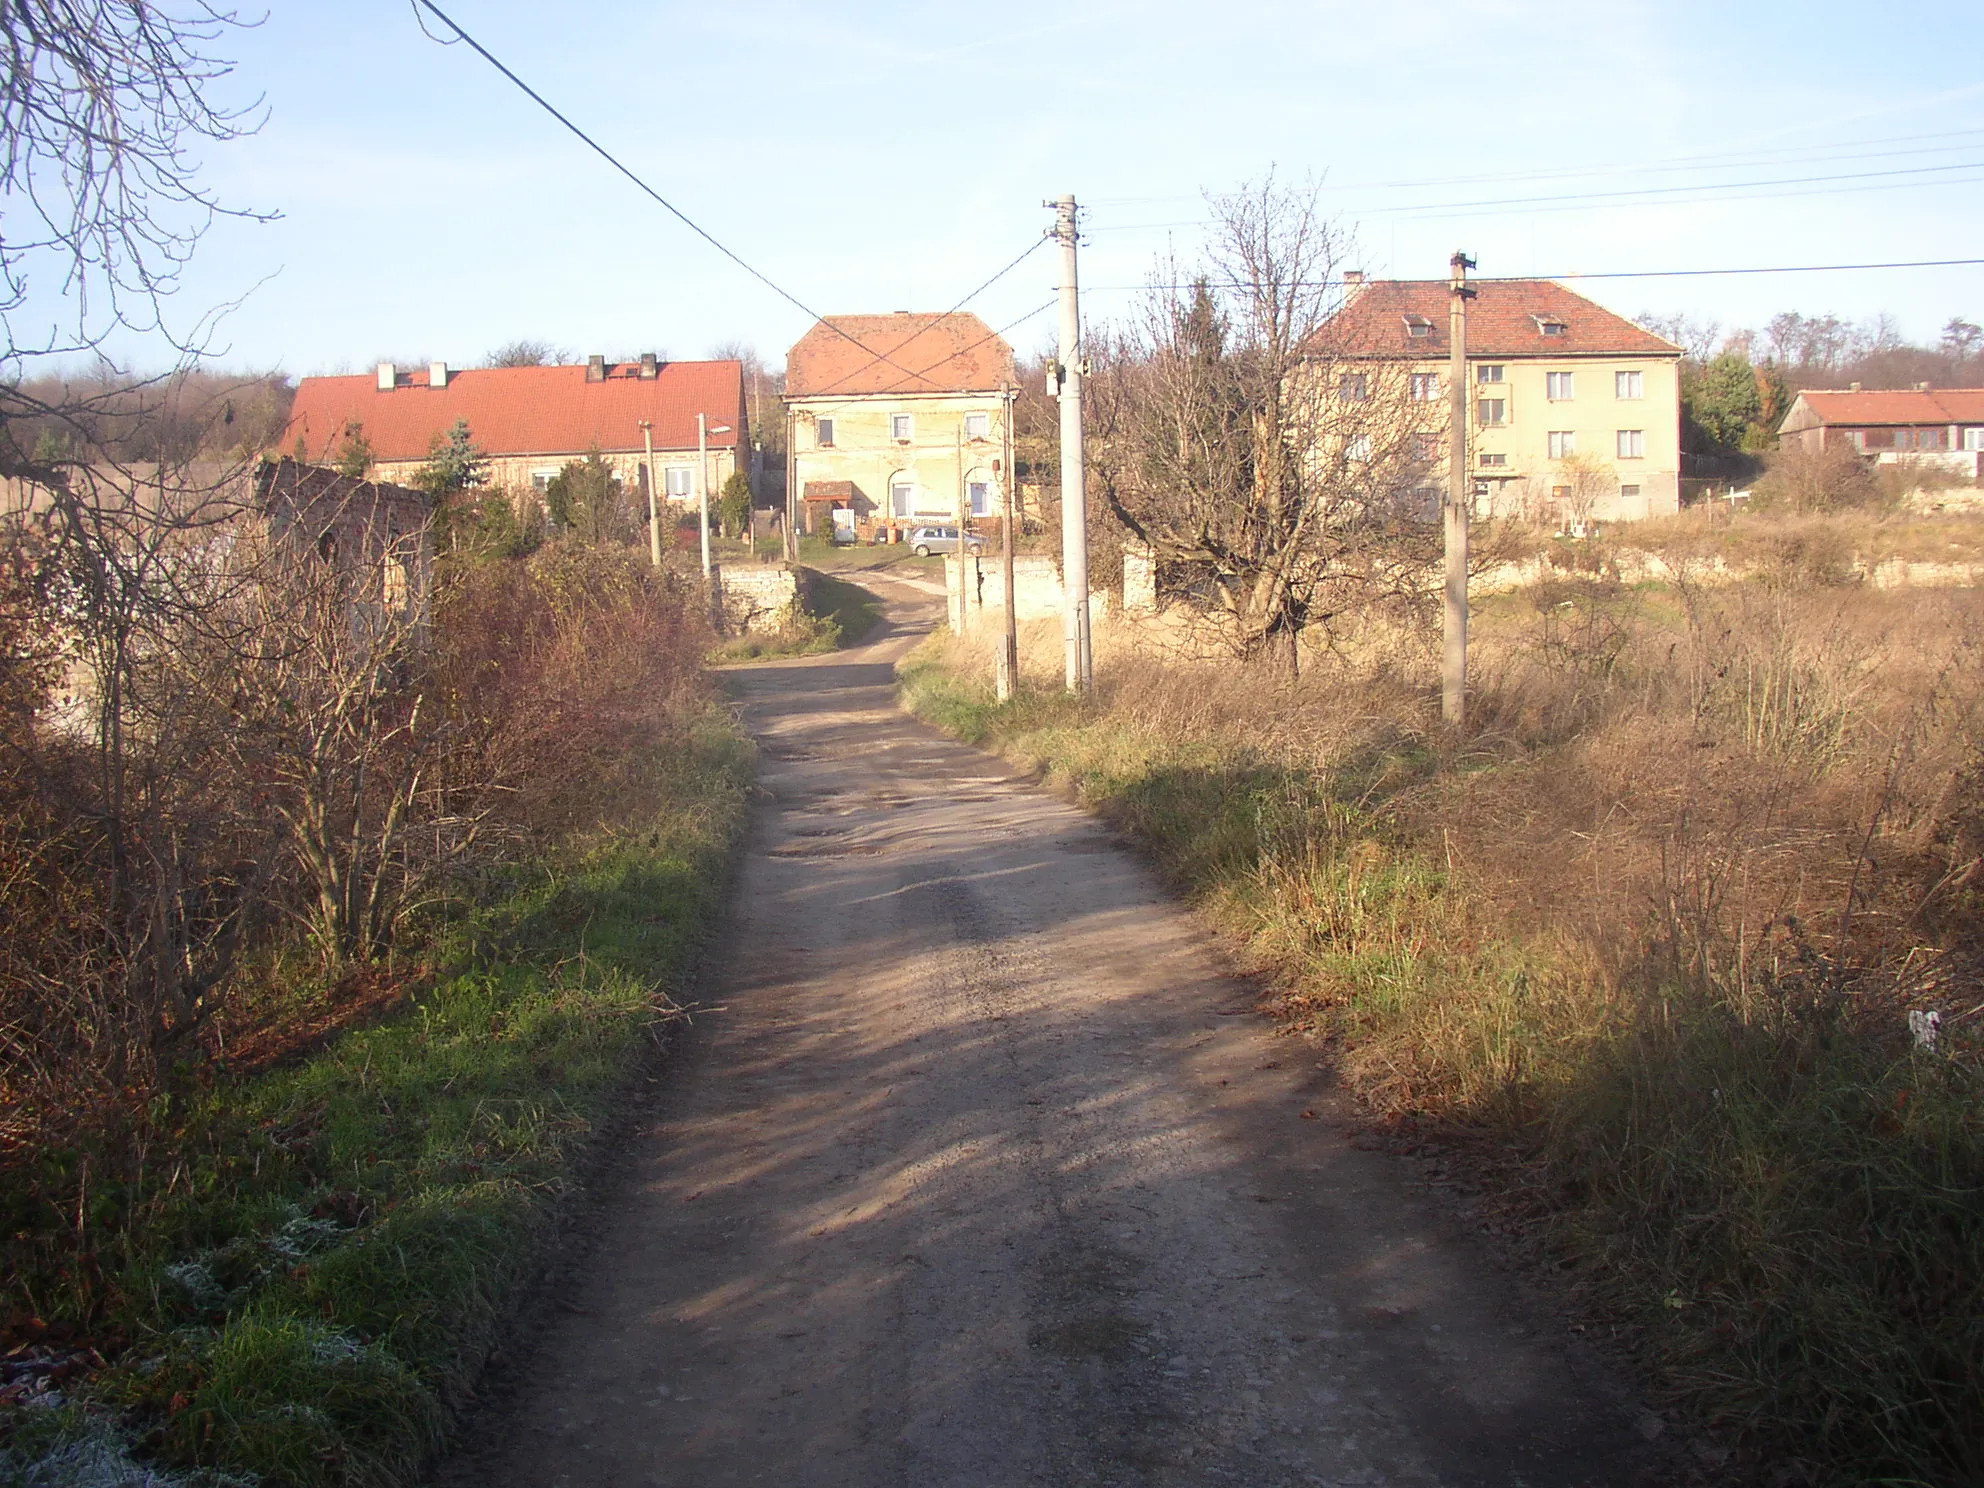 Photo showing: Village of Holousy, part of Třebusice municipality, Kladno District, Central Bohemian Region, Czech Republic. Houses in northern half of the village.